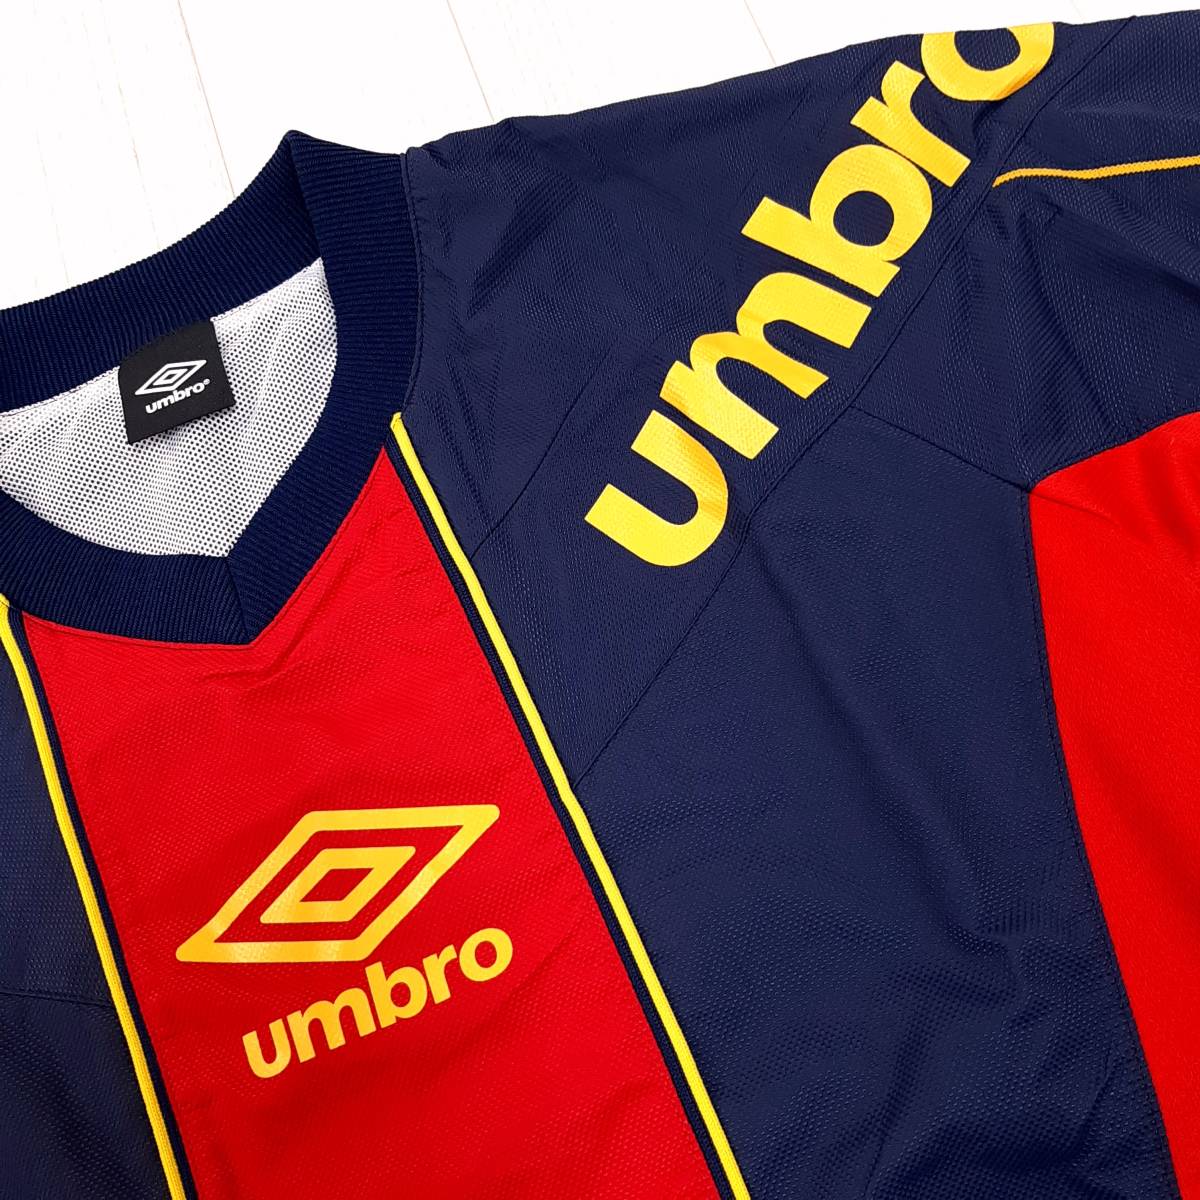 d6*UMBRO Umbro * reverse side mesh cloth V neck long sleeve window Bray car T-shirt men's S size navy navy blue color sport man and woman use soccer and so on 